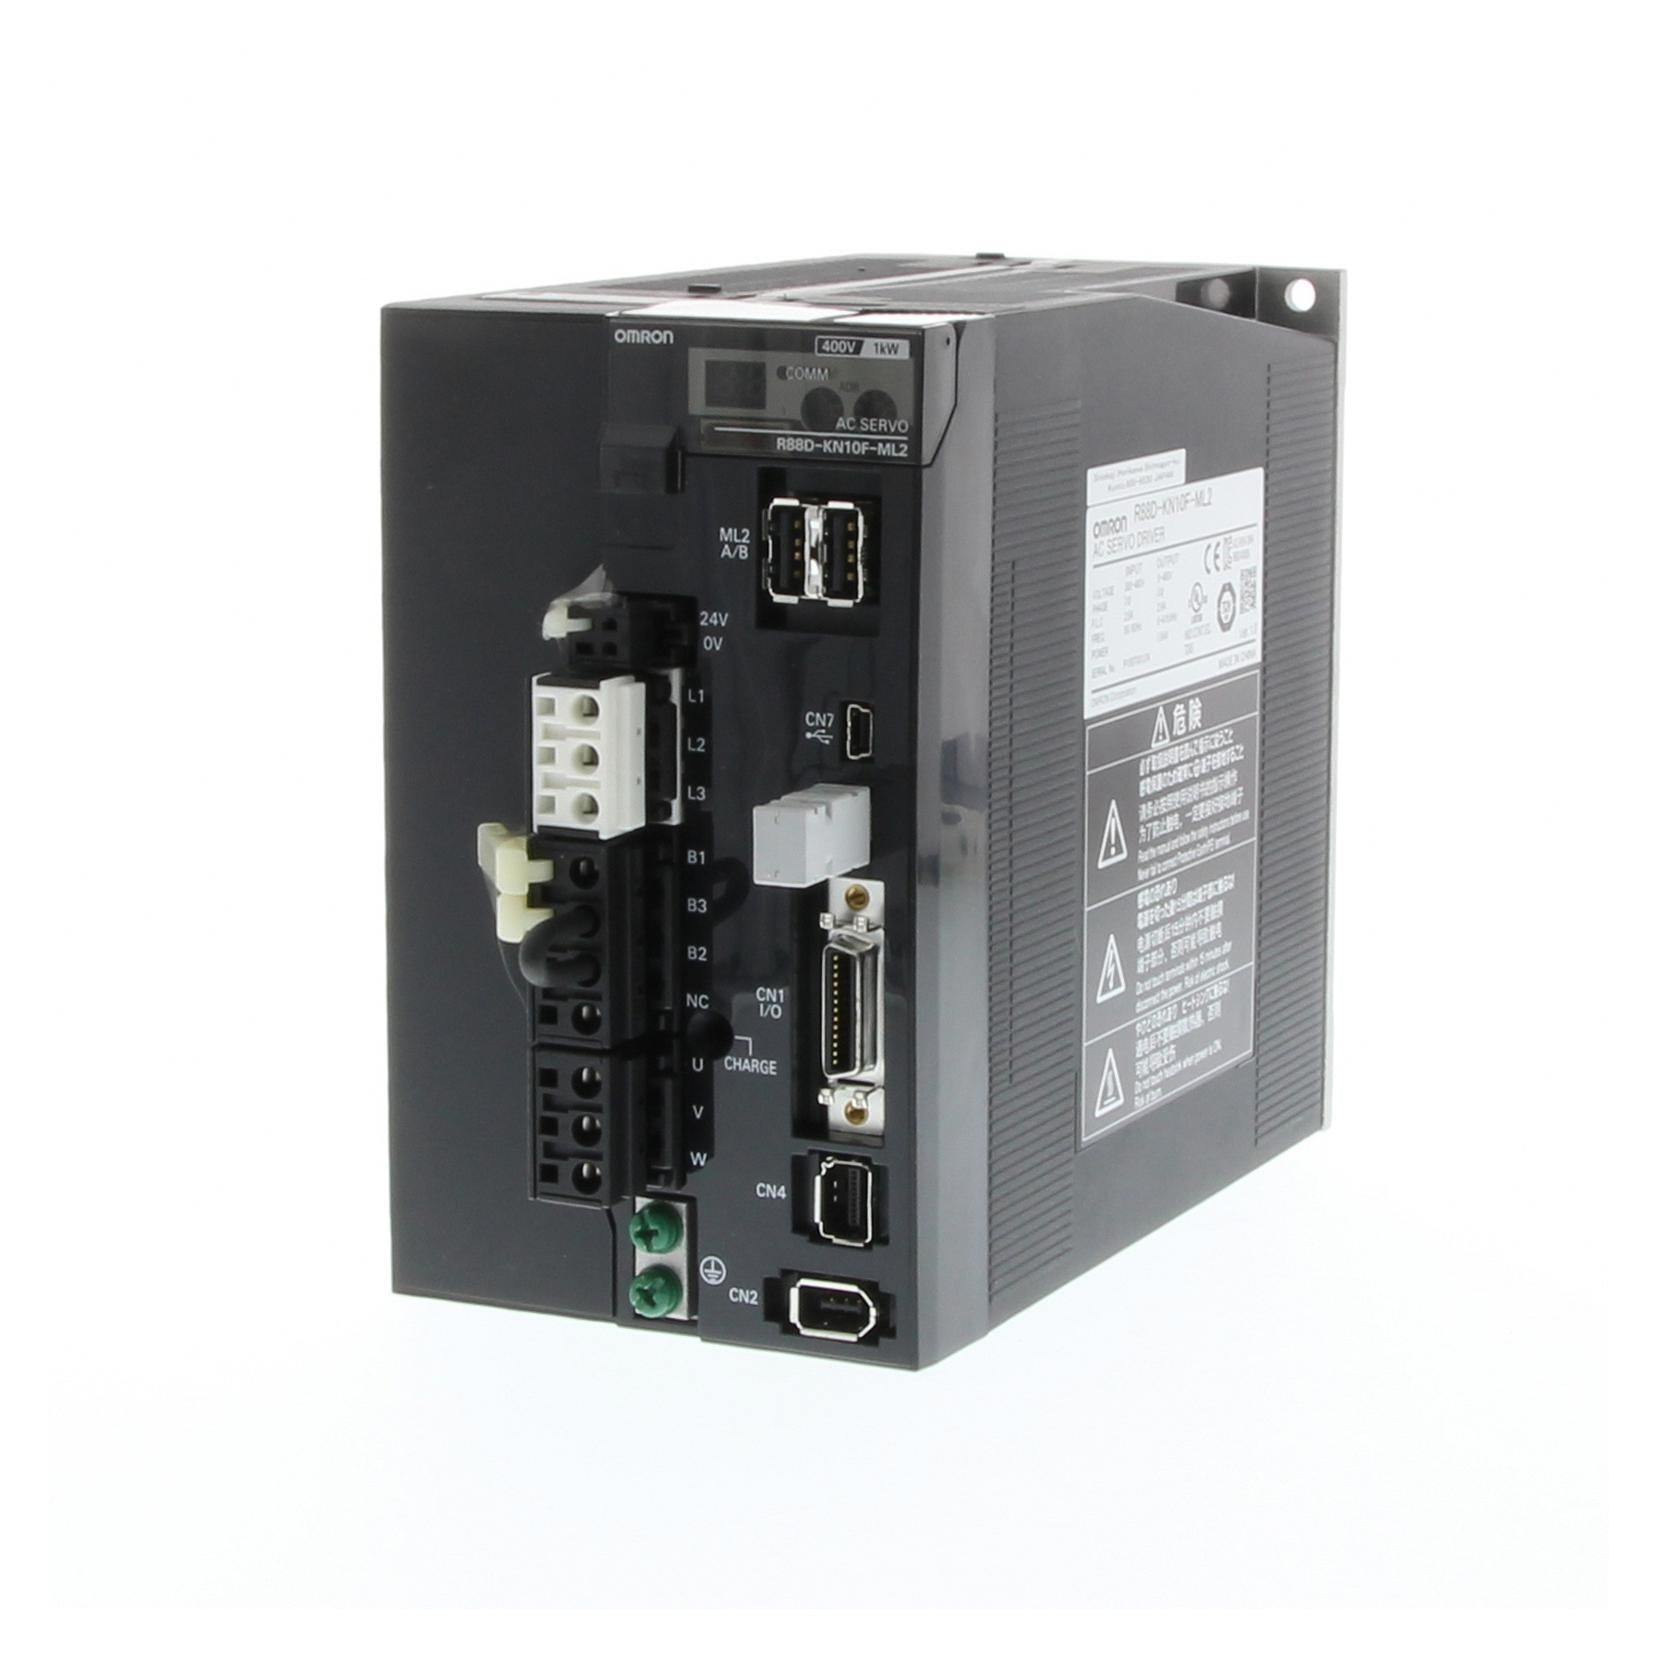 R88D-KN10F-ML2 AC MOTOR SPEED CONTROLLERS OMRON